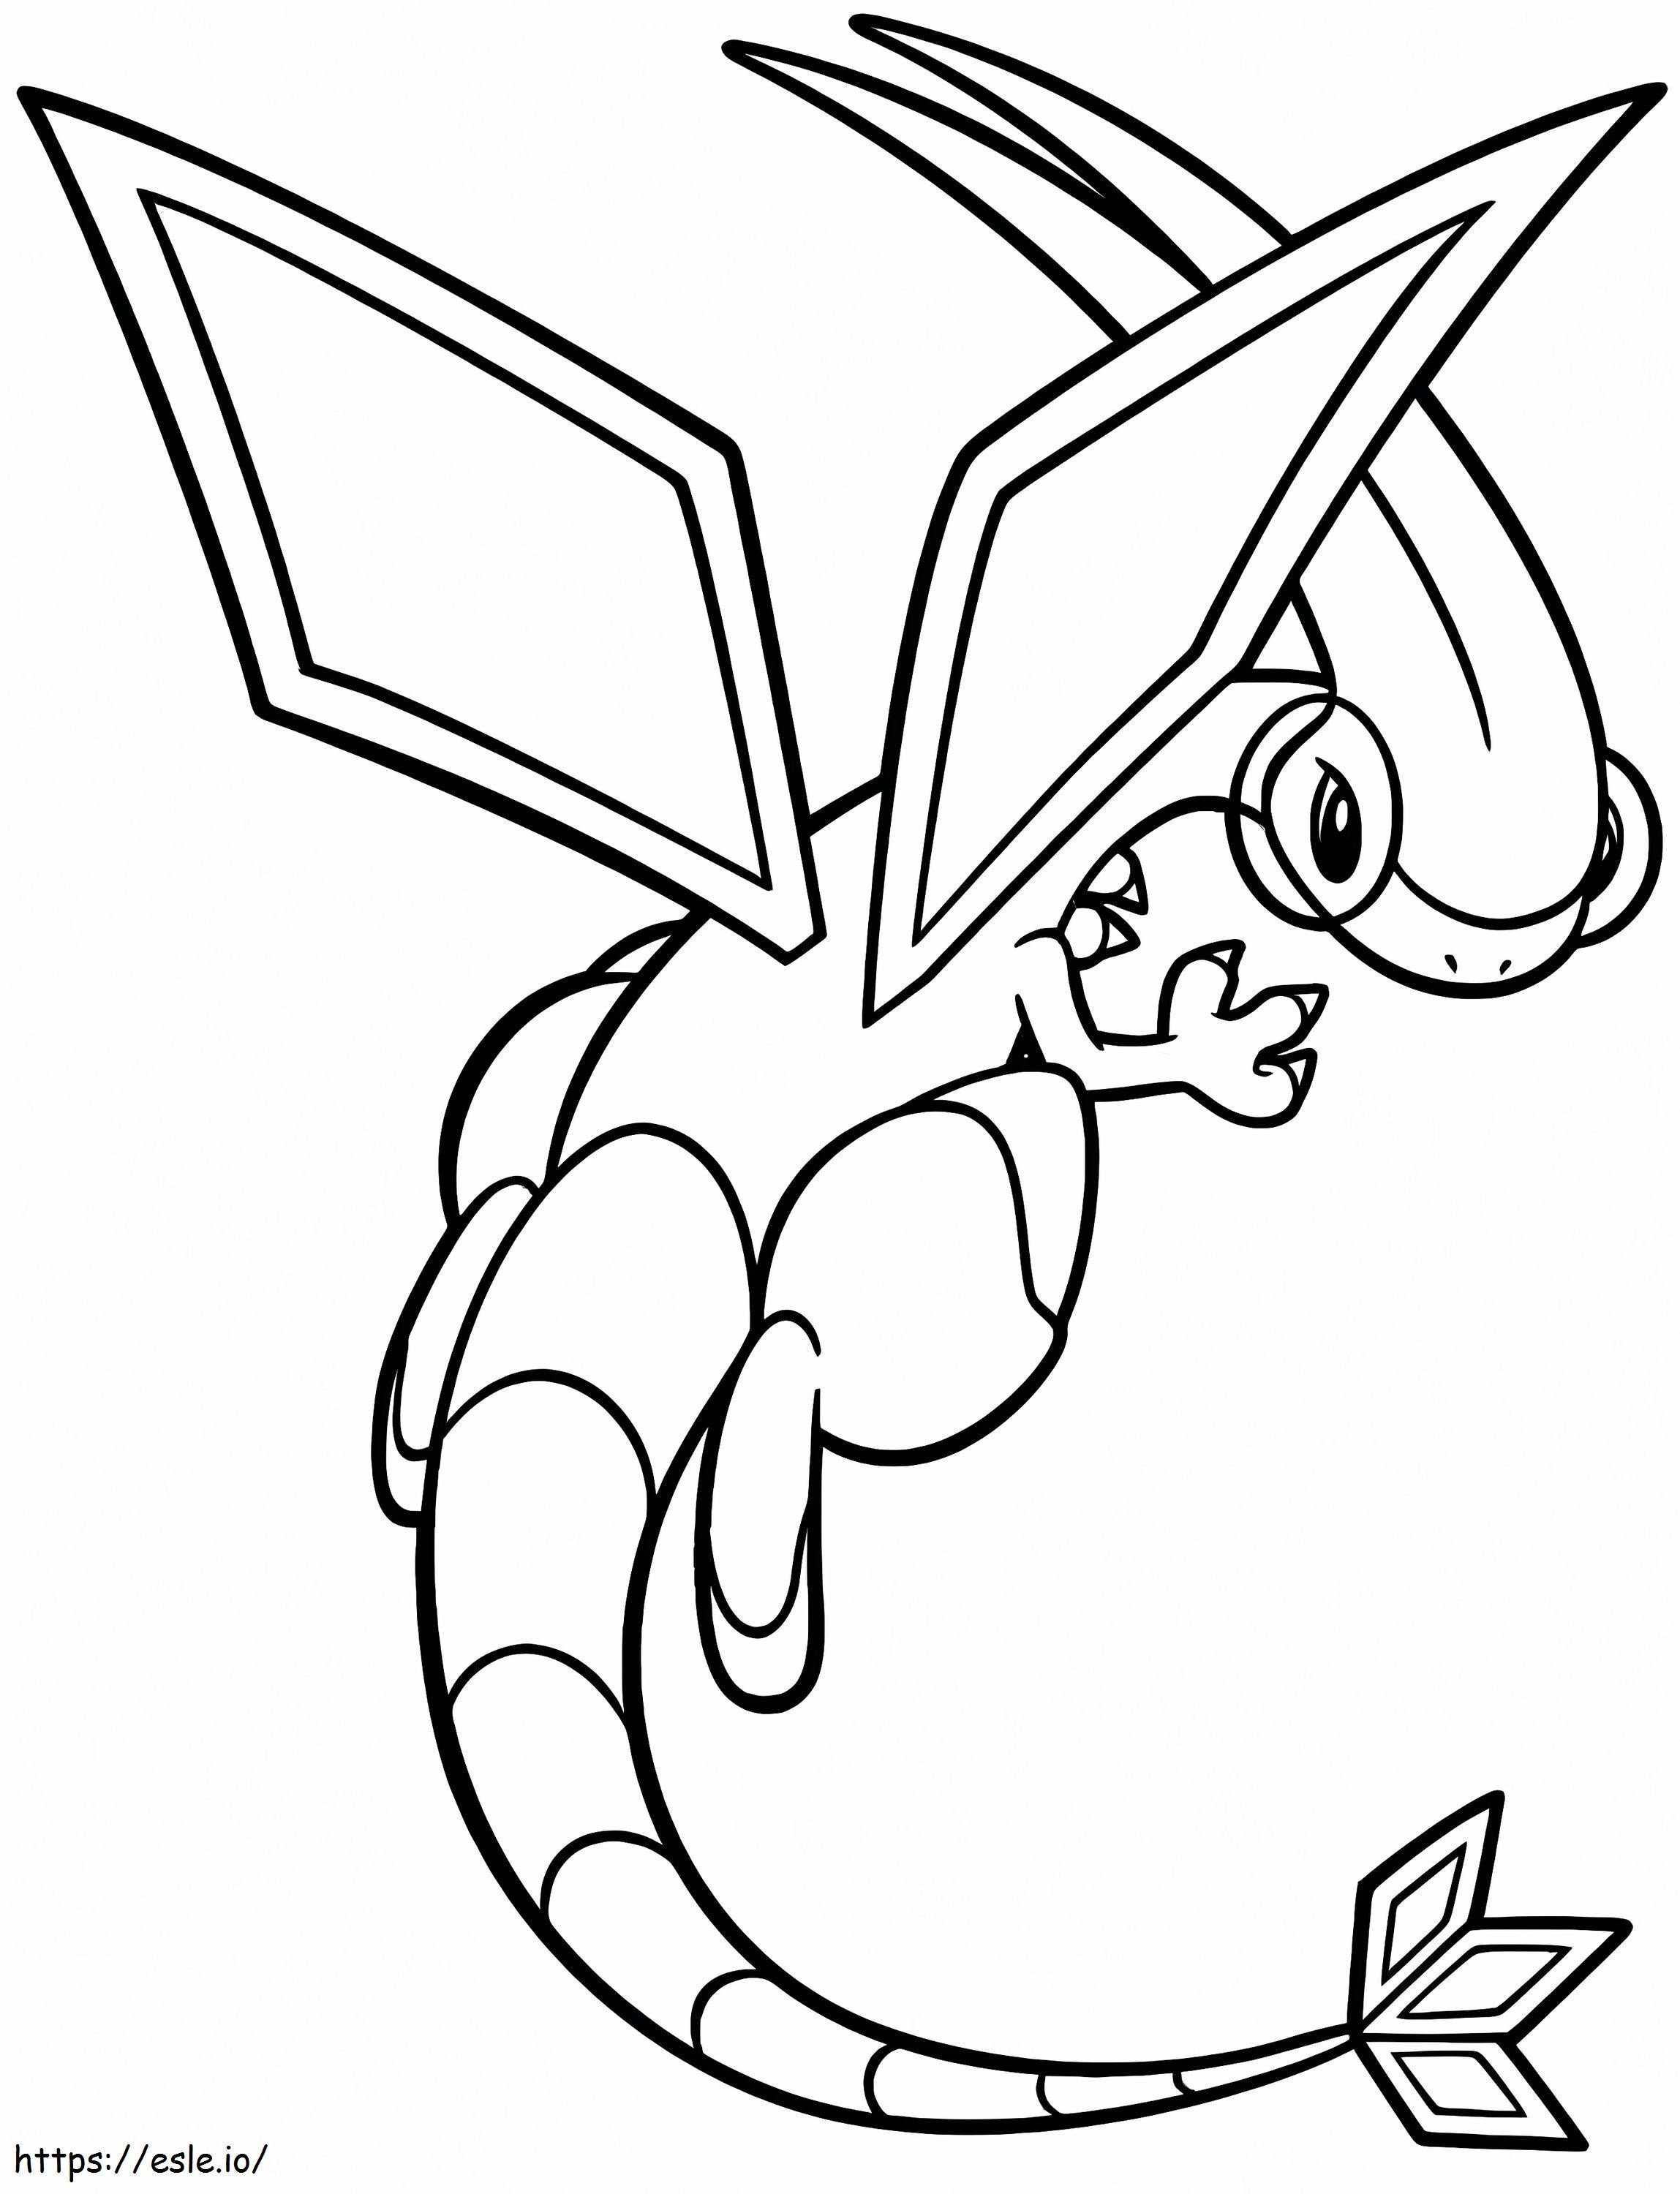 Flygon A Pokemon coloring page